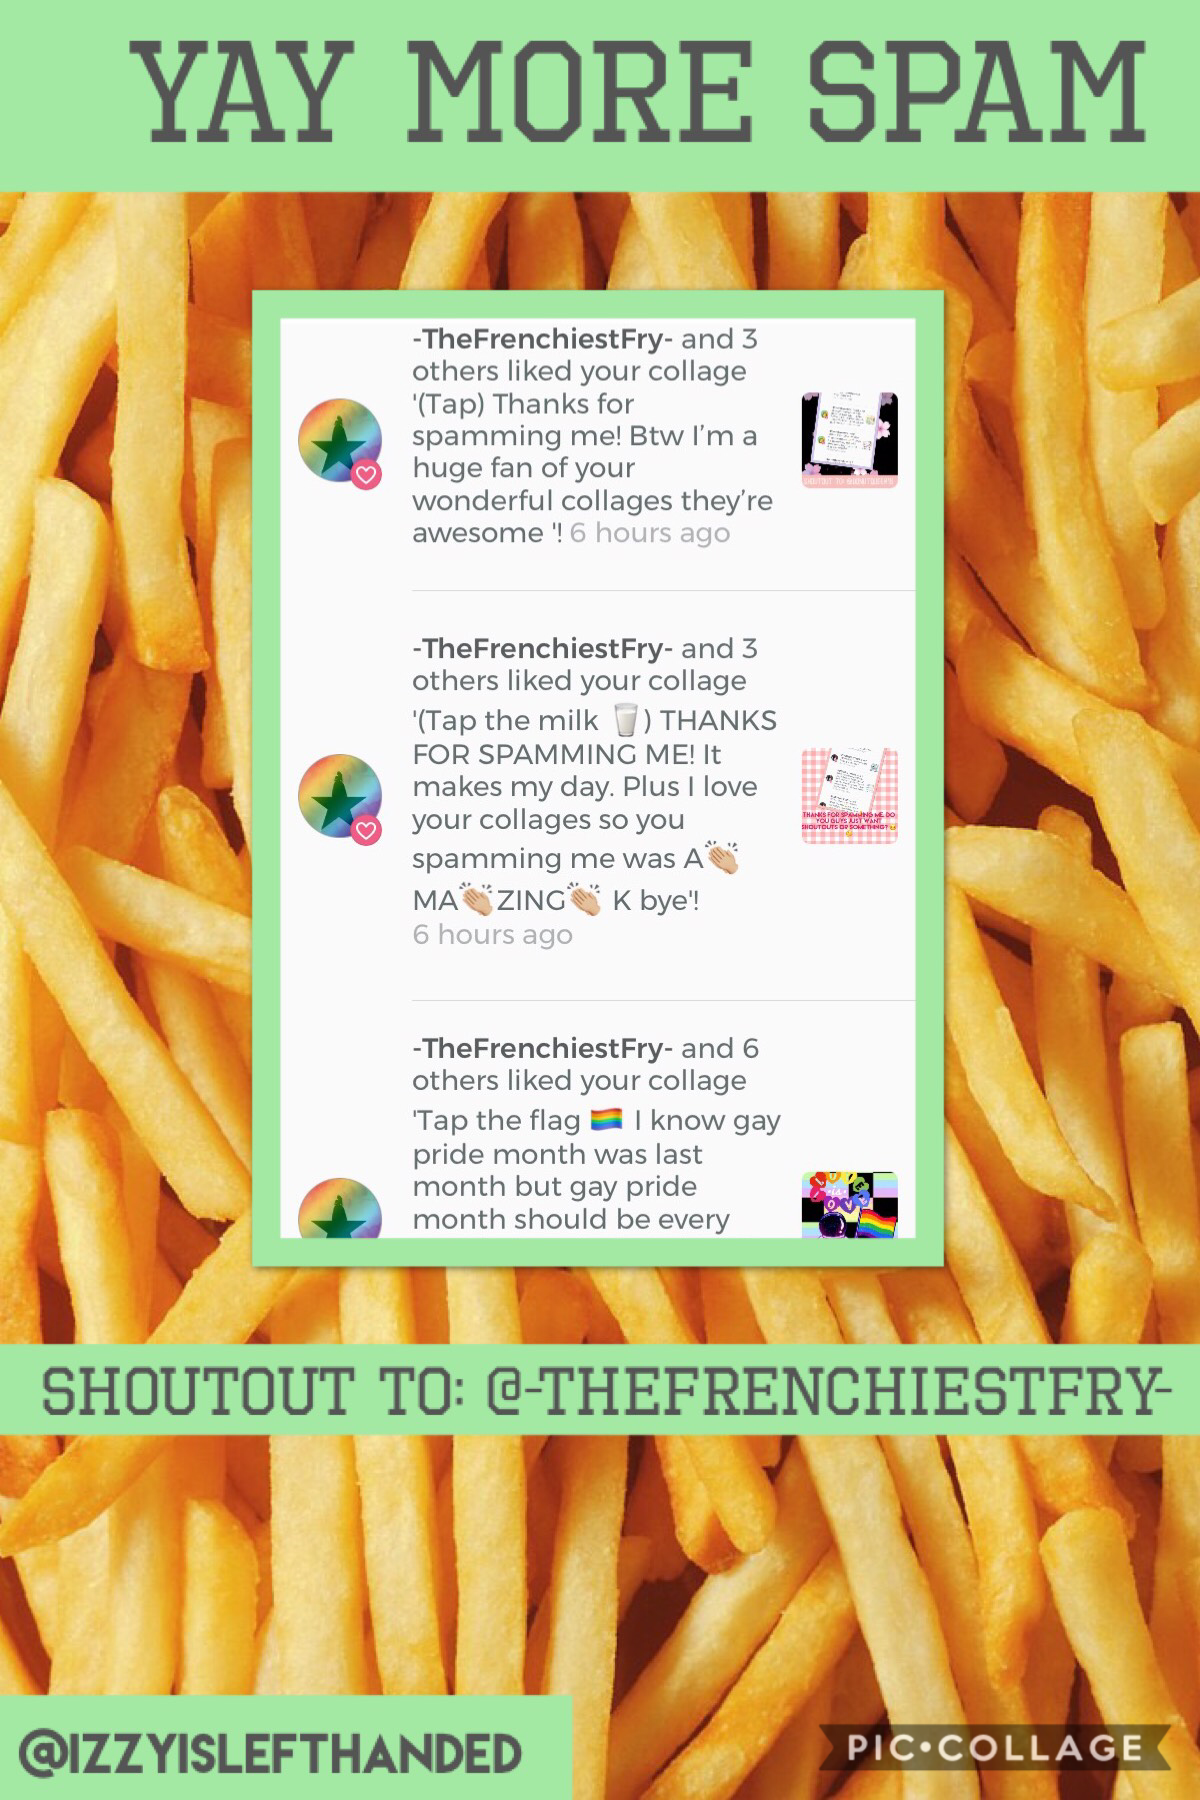 (Click the fries 🍟)

THANKSSSS JORDAN!
#loveoctagonclub
Hehe the background is french fries. 
Cause -TheFrenchiestFry-...

😐 

ok i will go now.